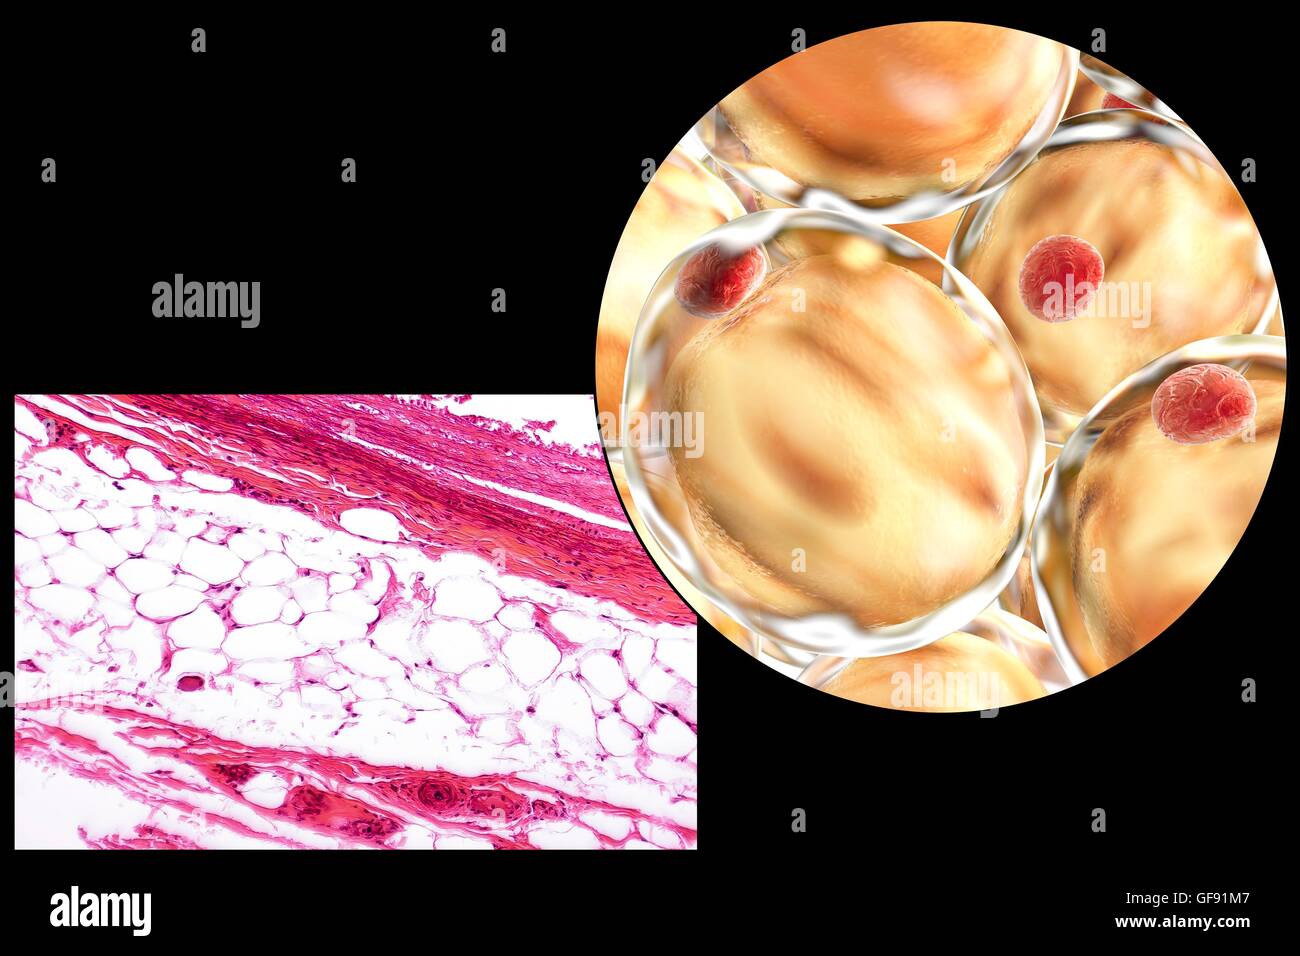 Fat cells, light micrograph and computer illustration. White adipose tissue composed of adipocytes (fat cells). Adipocytes form adipose tissue, which stores energy as an insulating layer of fat. White adipose tissue is used as a store of energy but also a Stock Photo